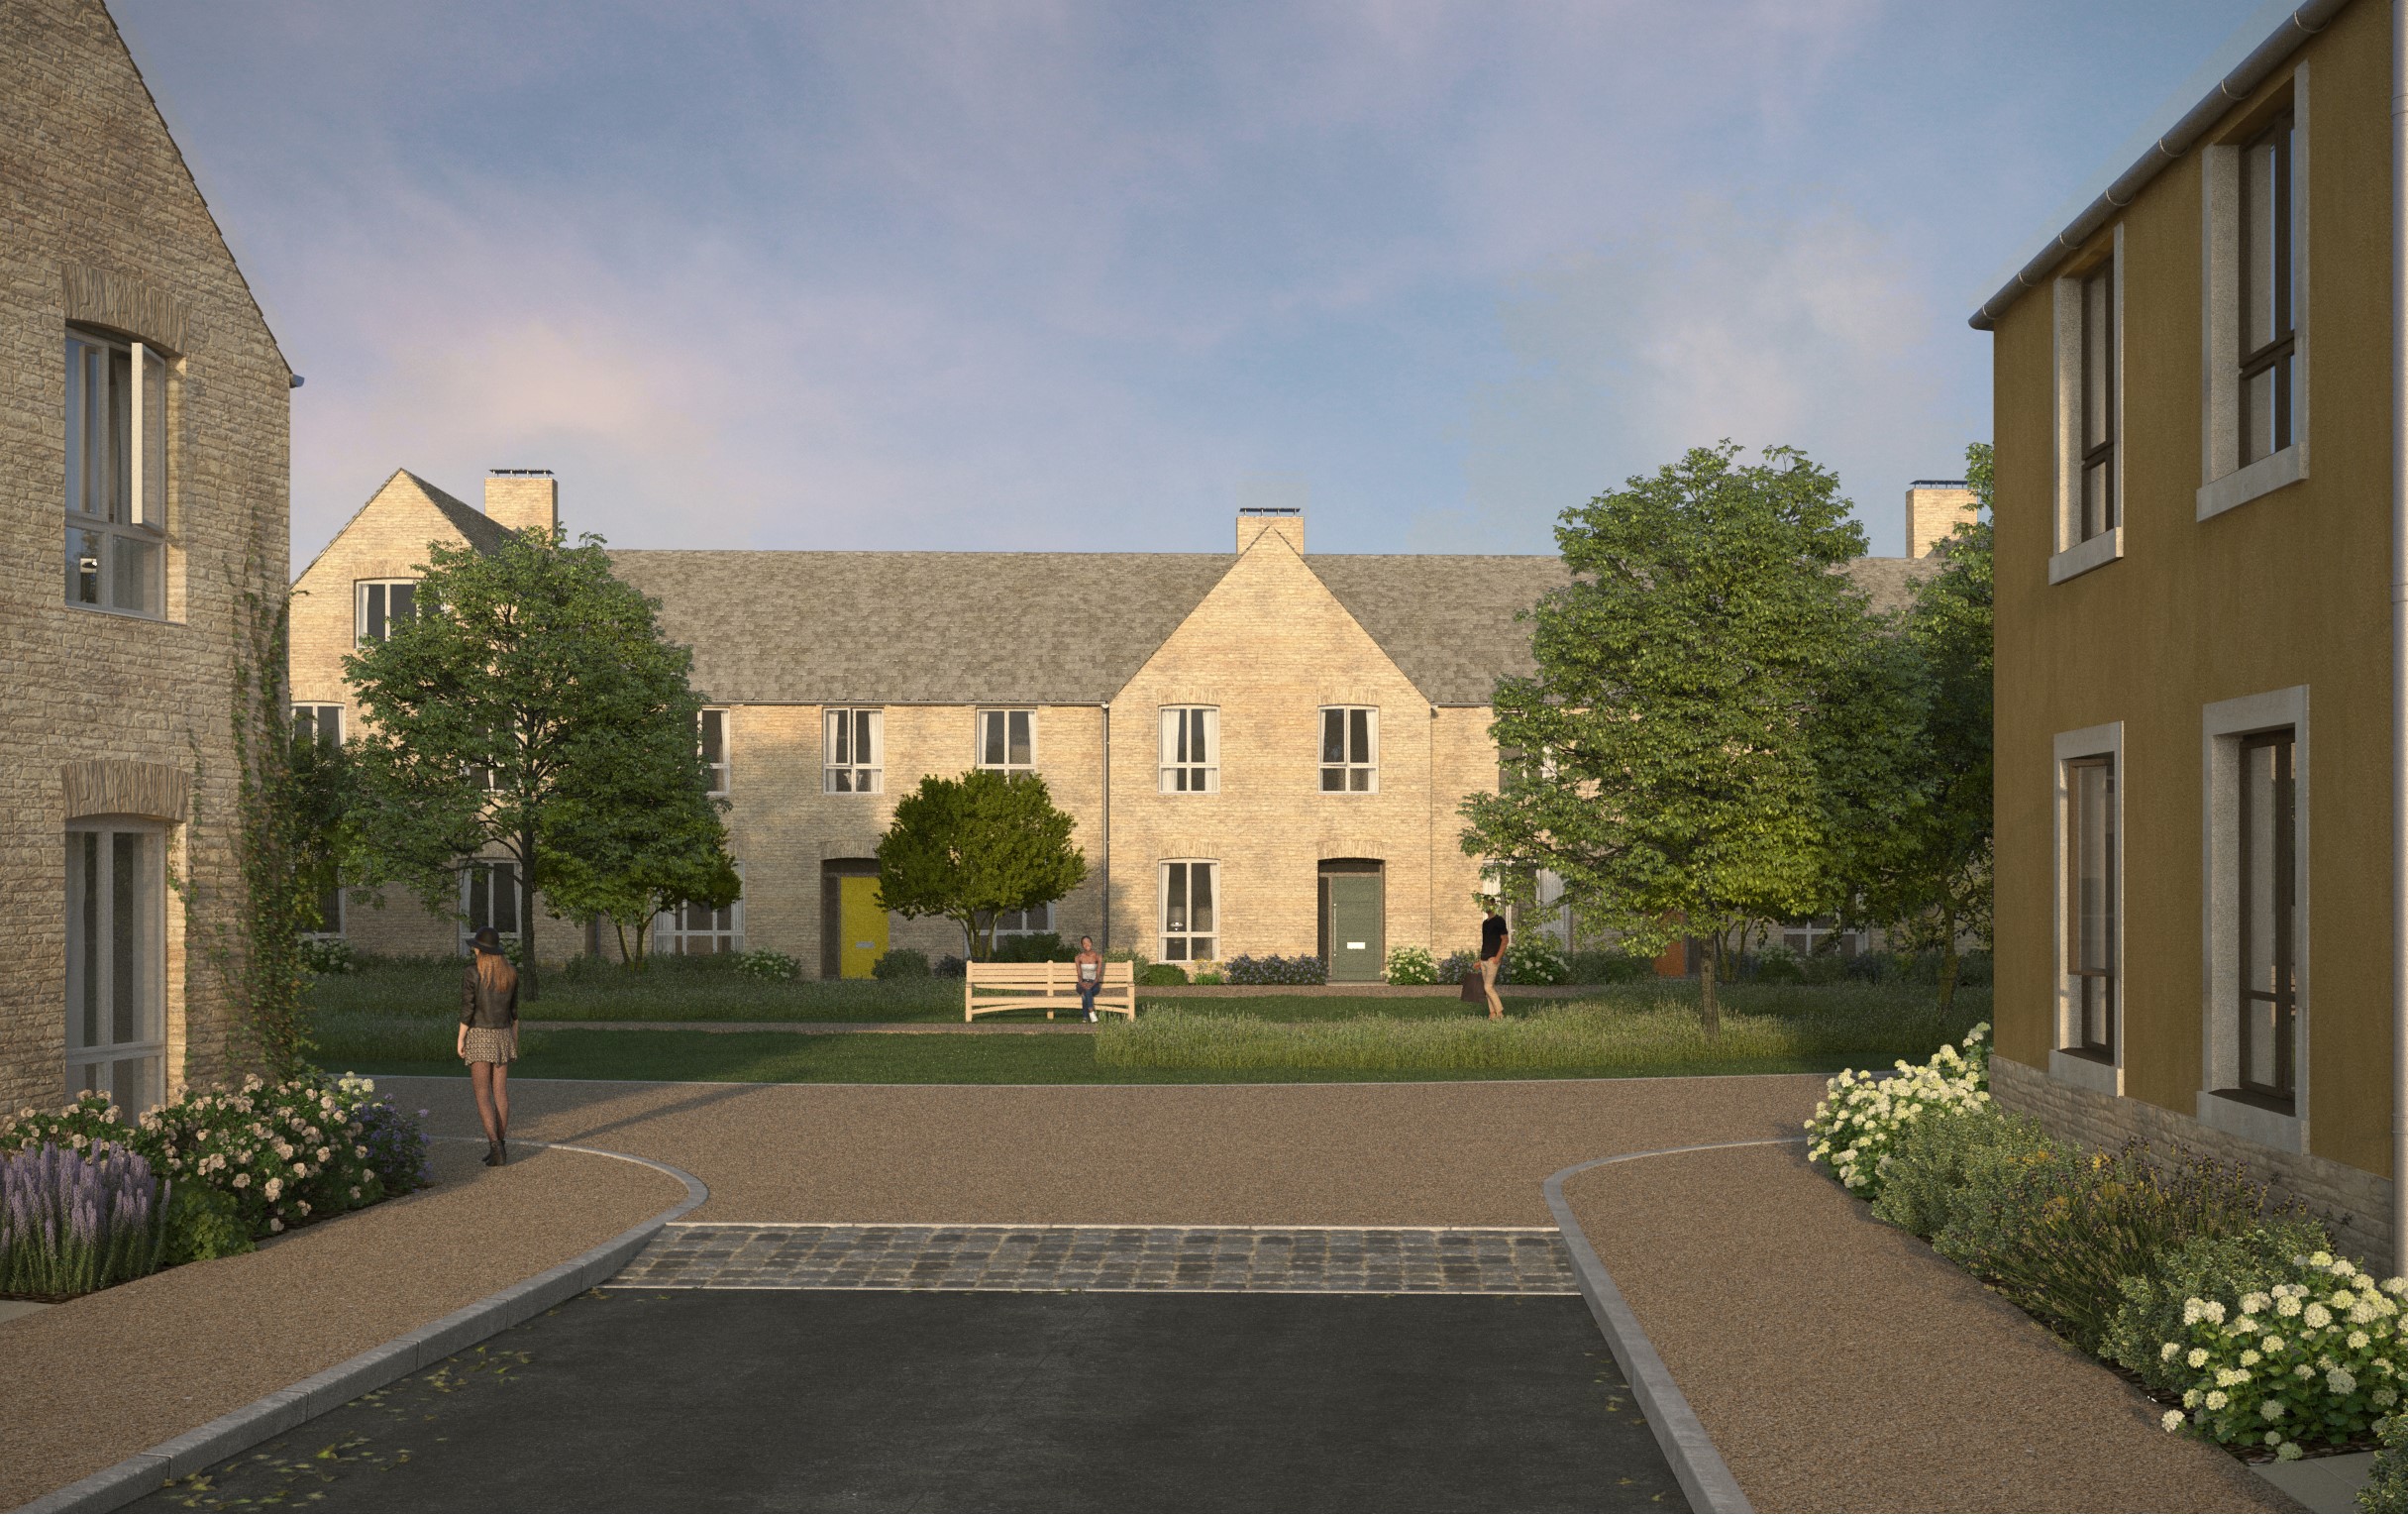 Shared Ownership homes at The Steadings, Cirencester.